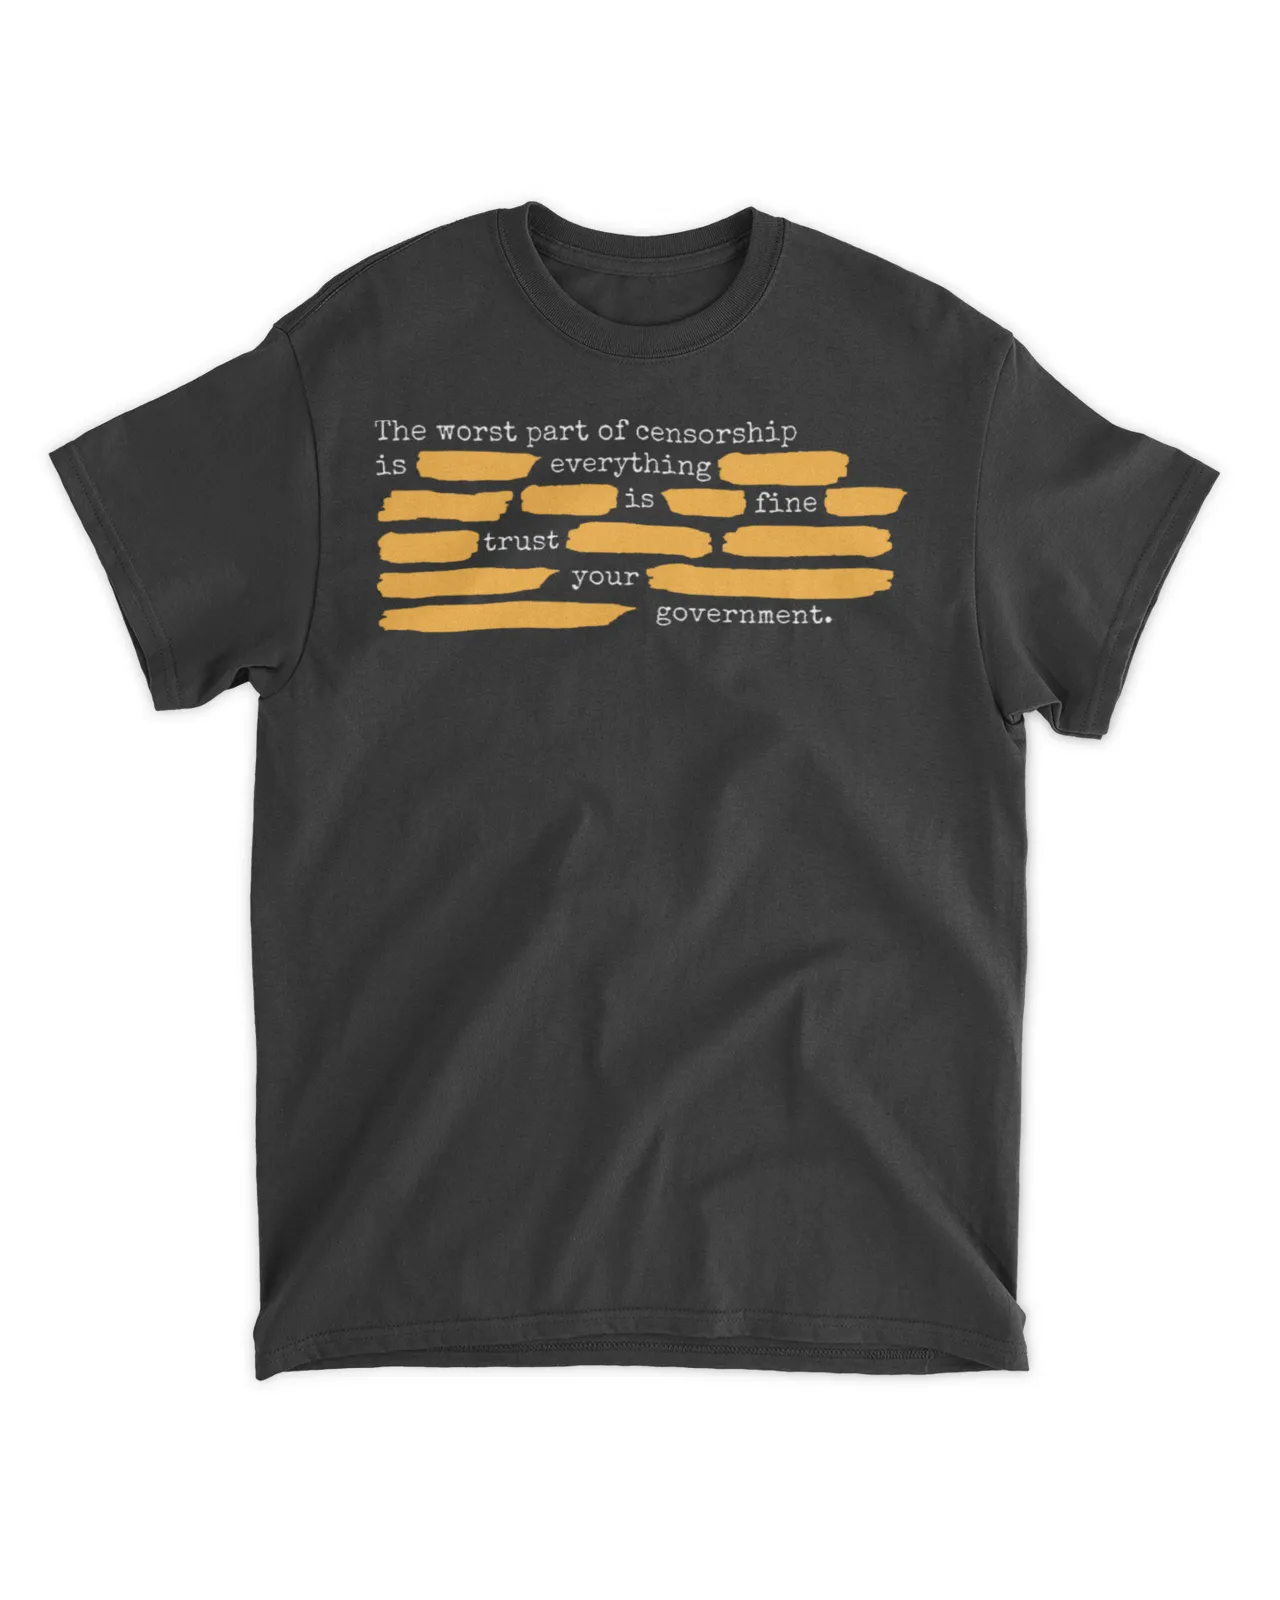  The worst part of censorship is everything is fine trust your government shirt